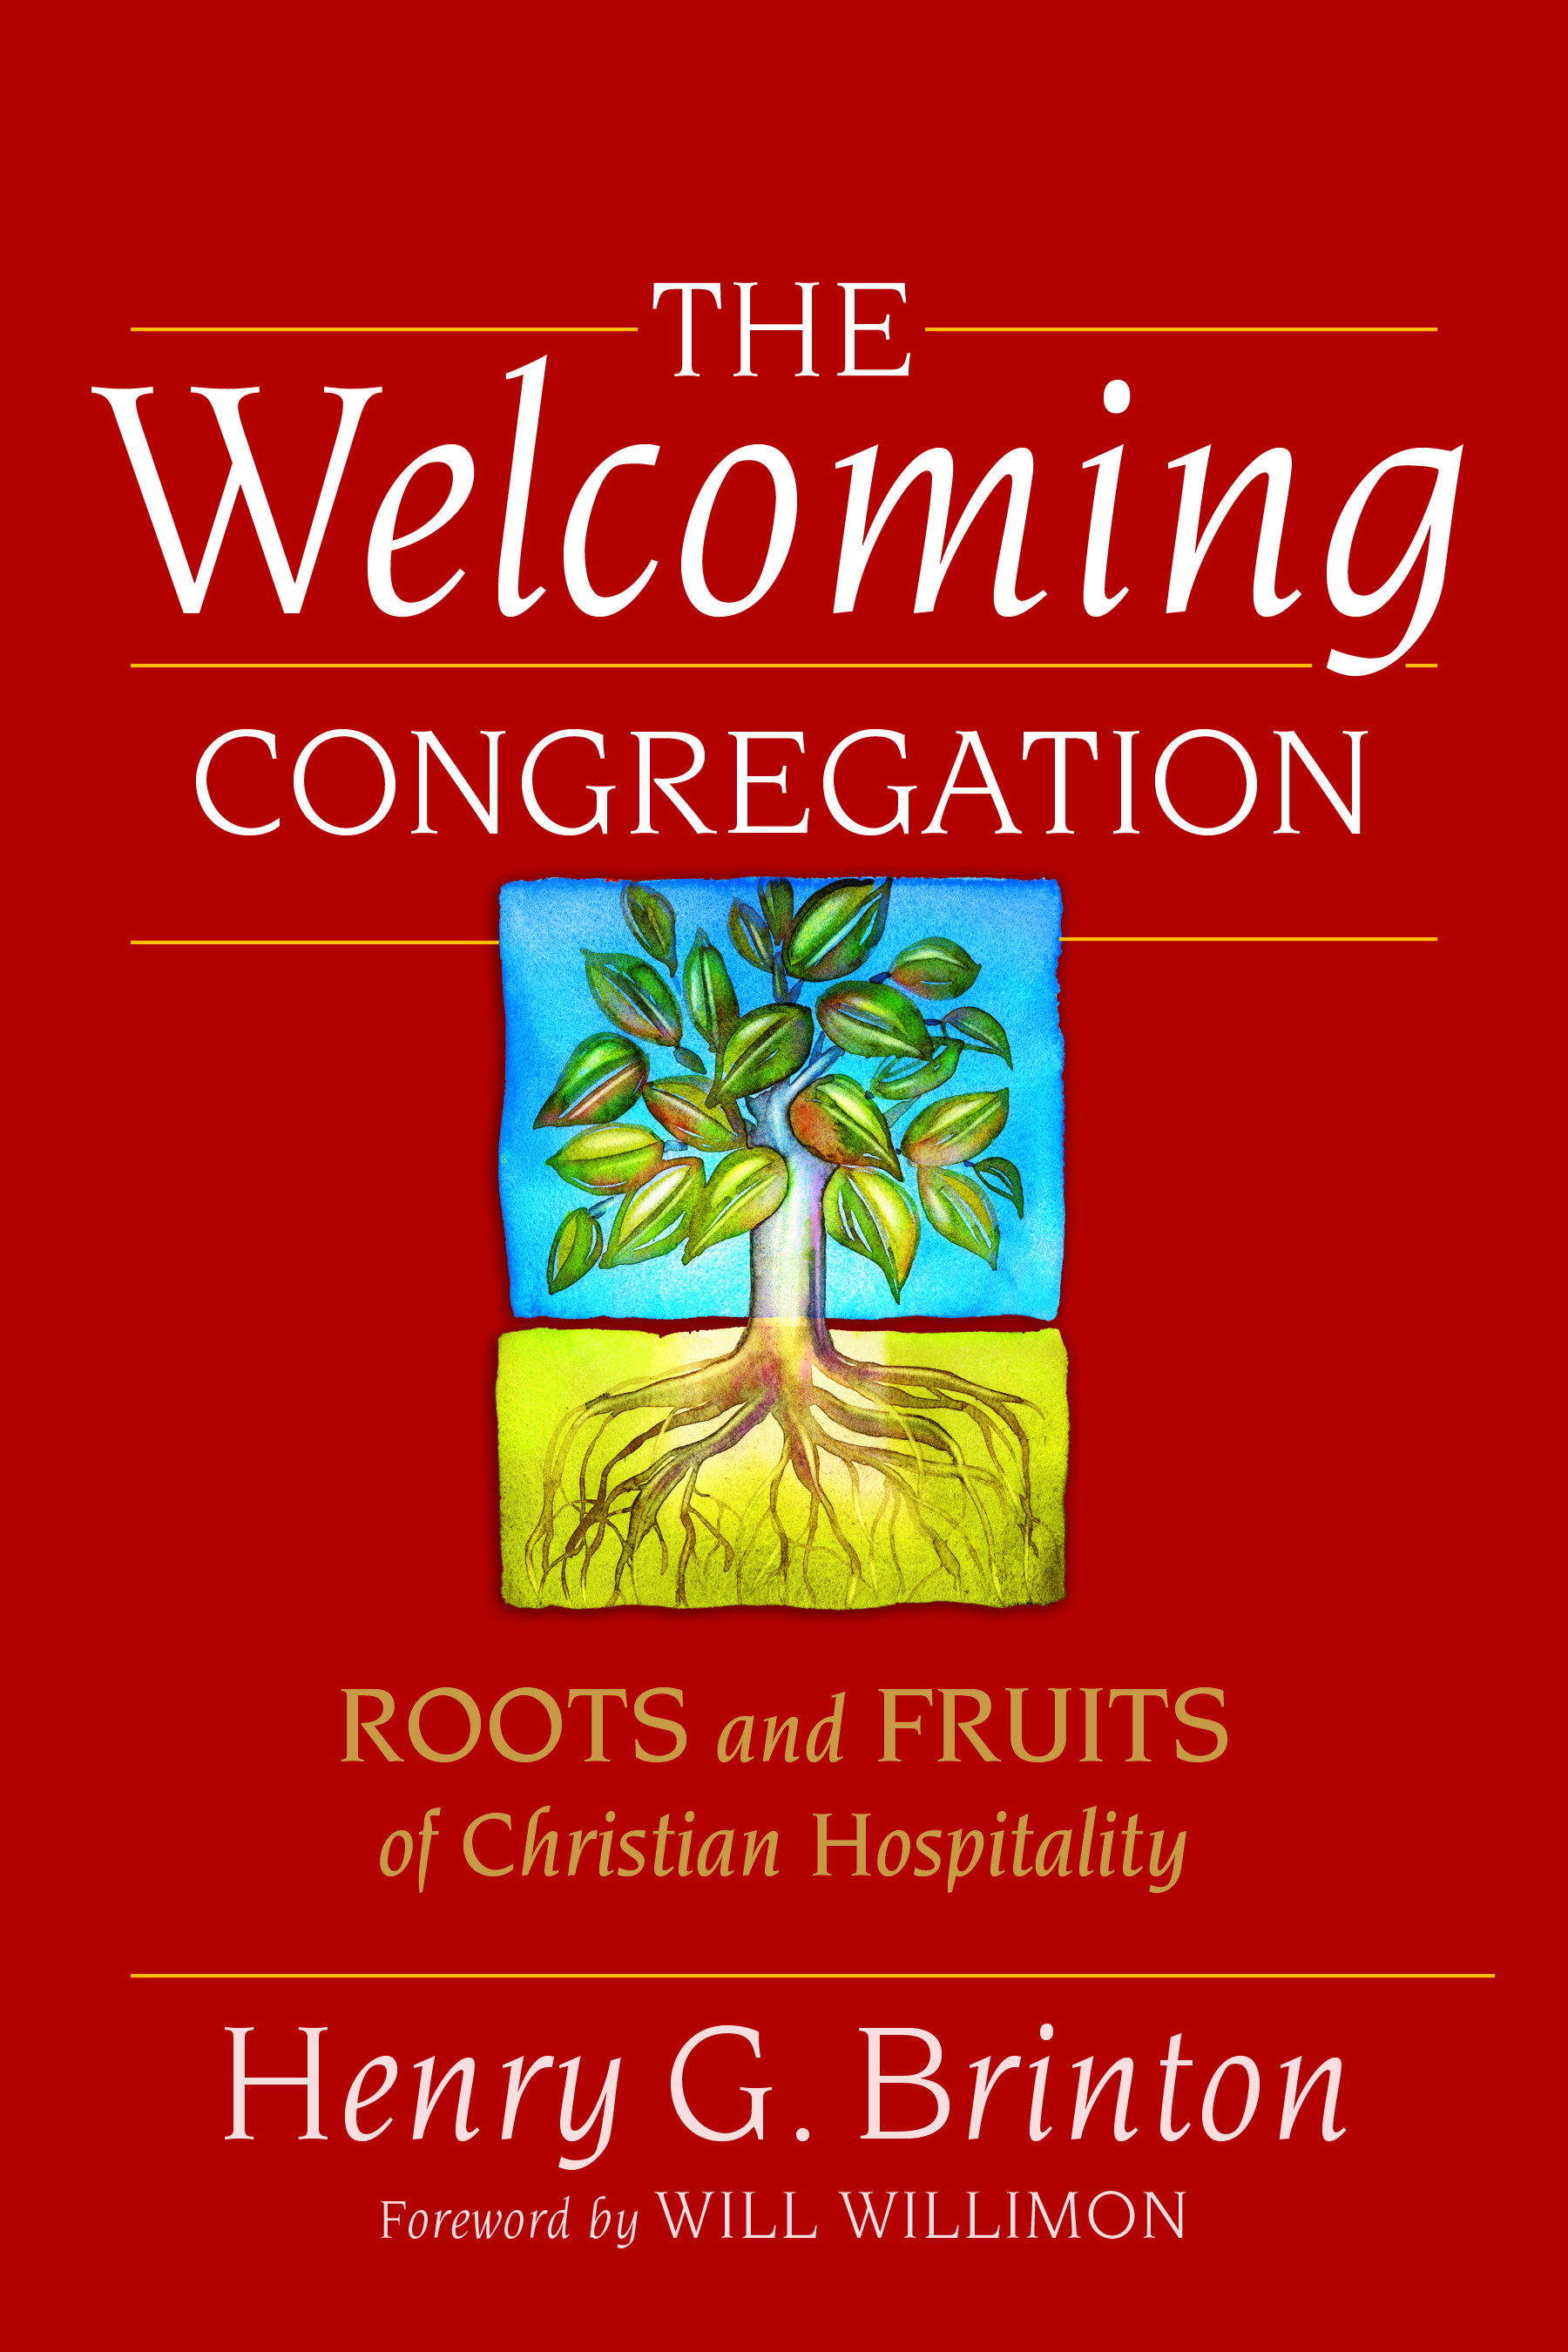 The Welcoming Congregation